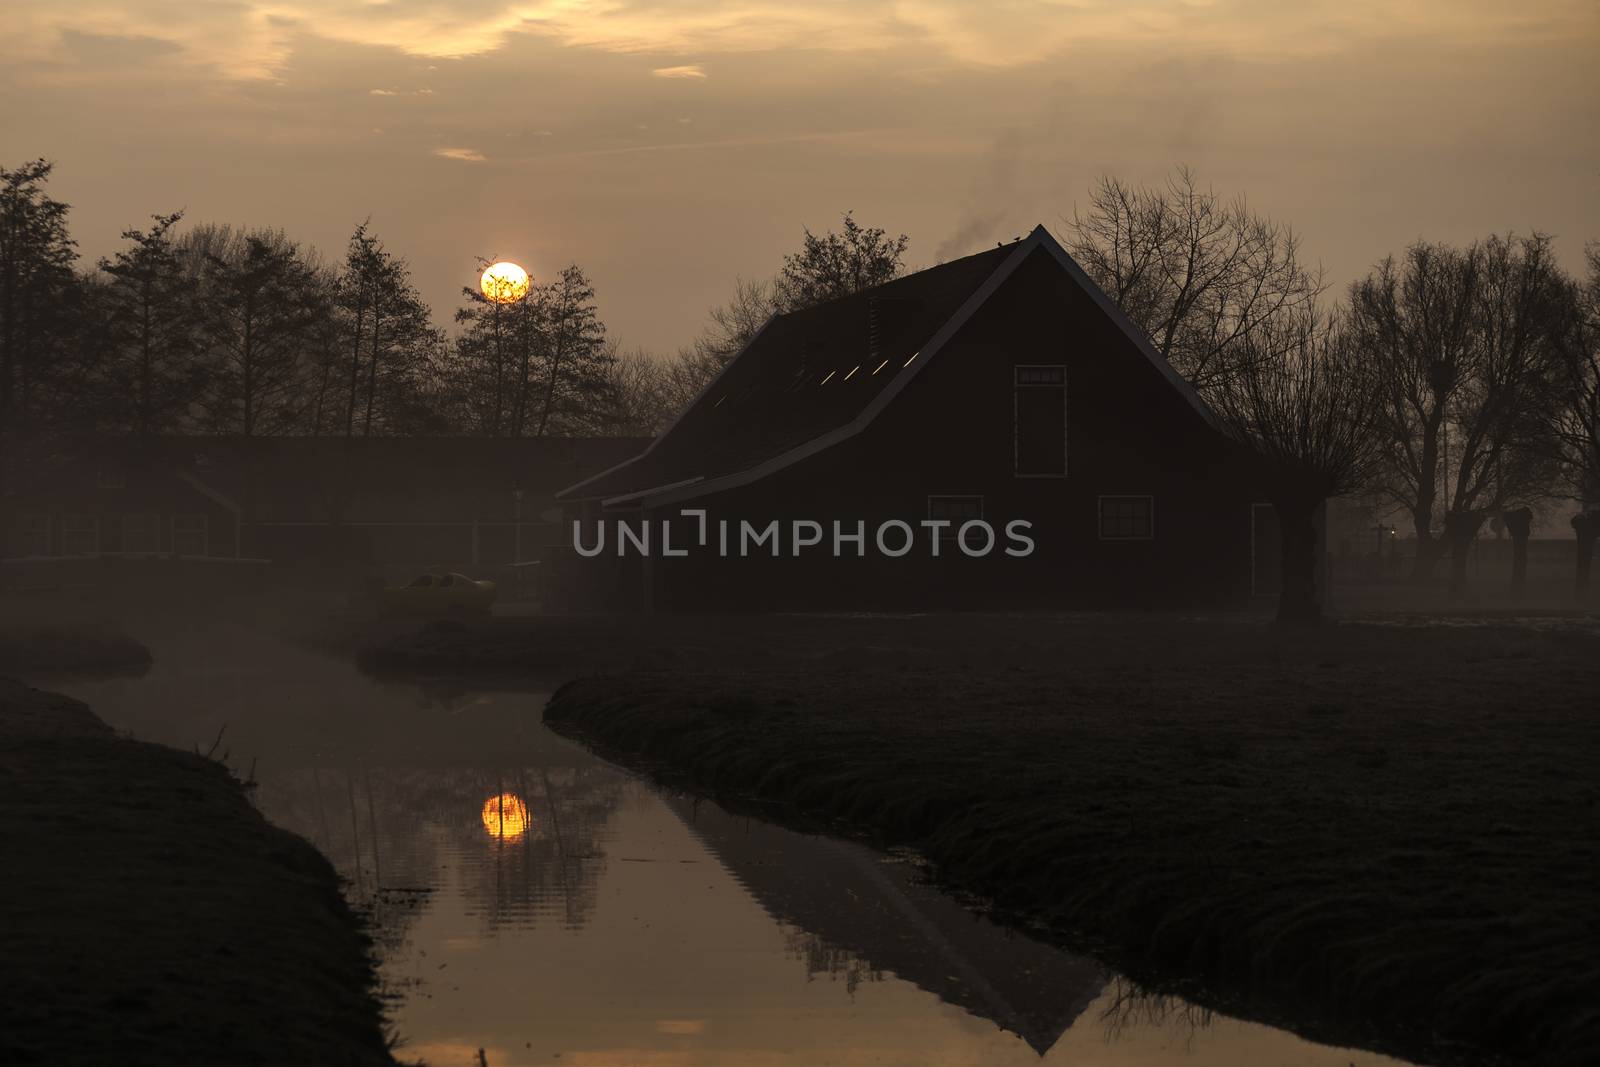 Beautiful typical Dutch wooden houses architecture at the sunrise moment mirrored on the calm canal of Zaanse Schans located in the North of Amsterdam, Netherlands by ankorlight